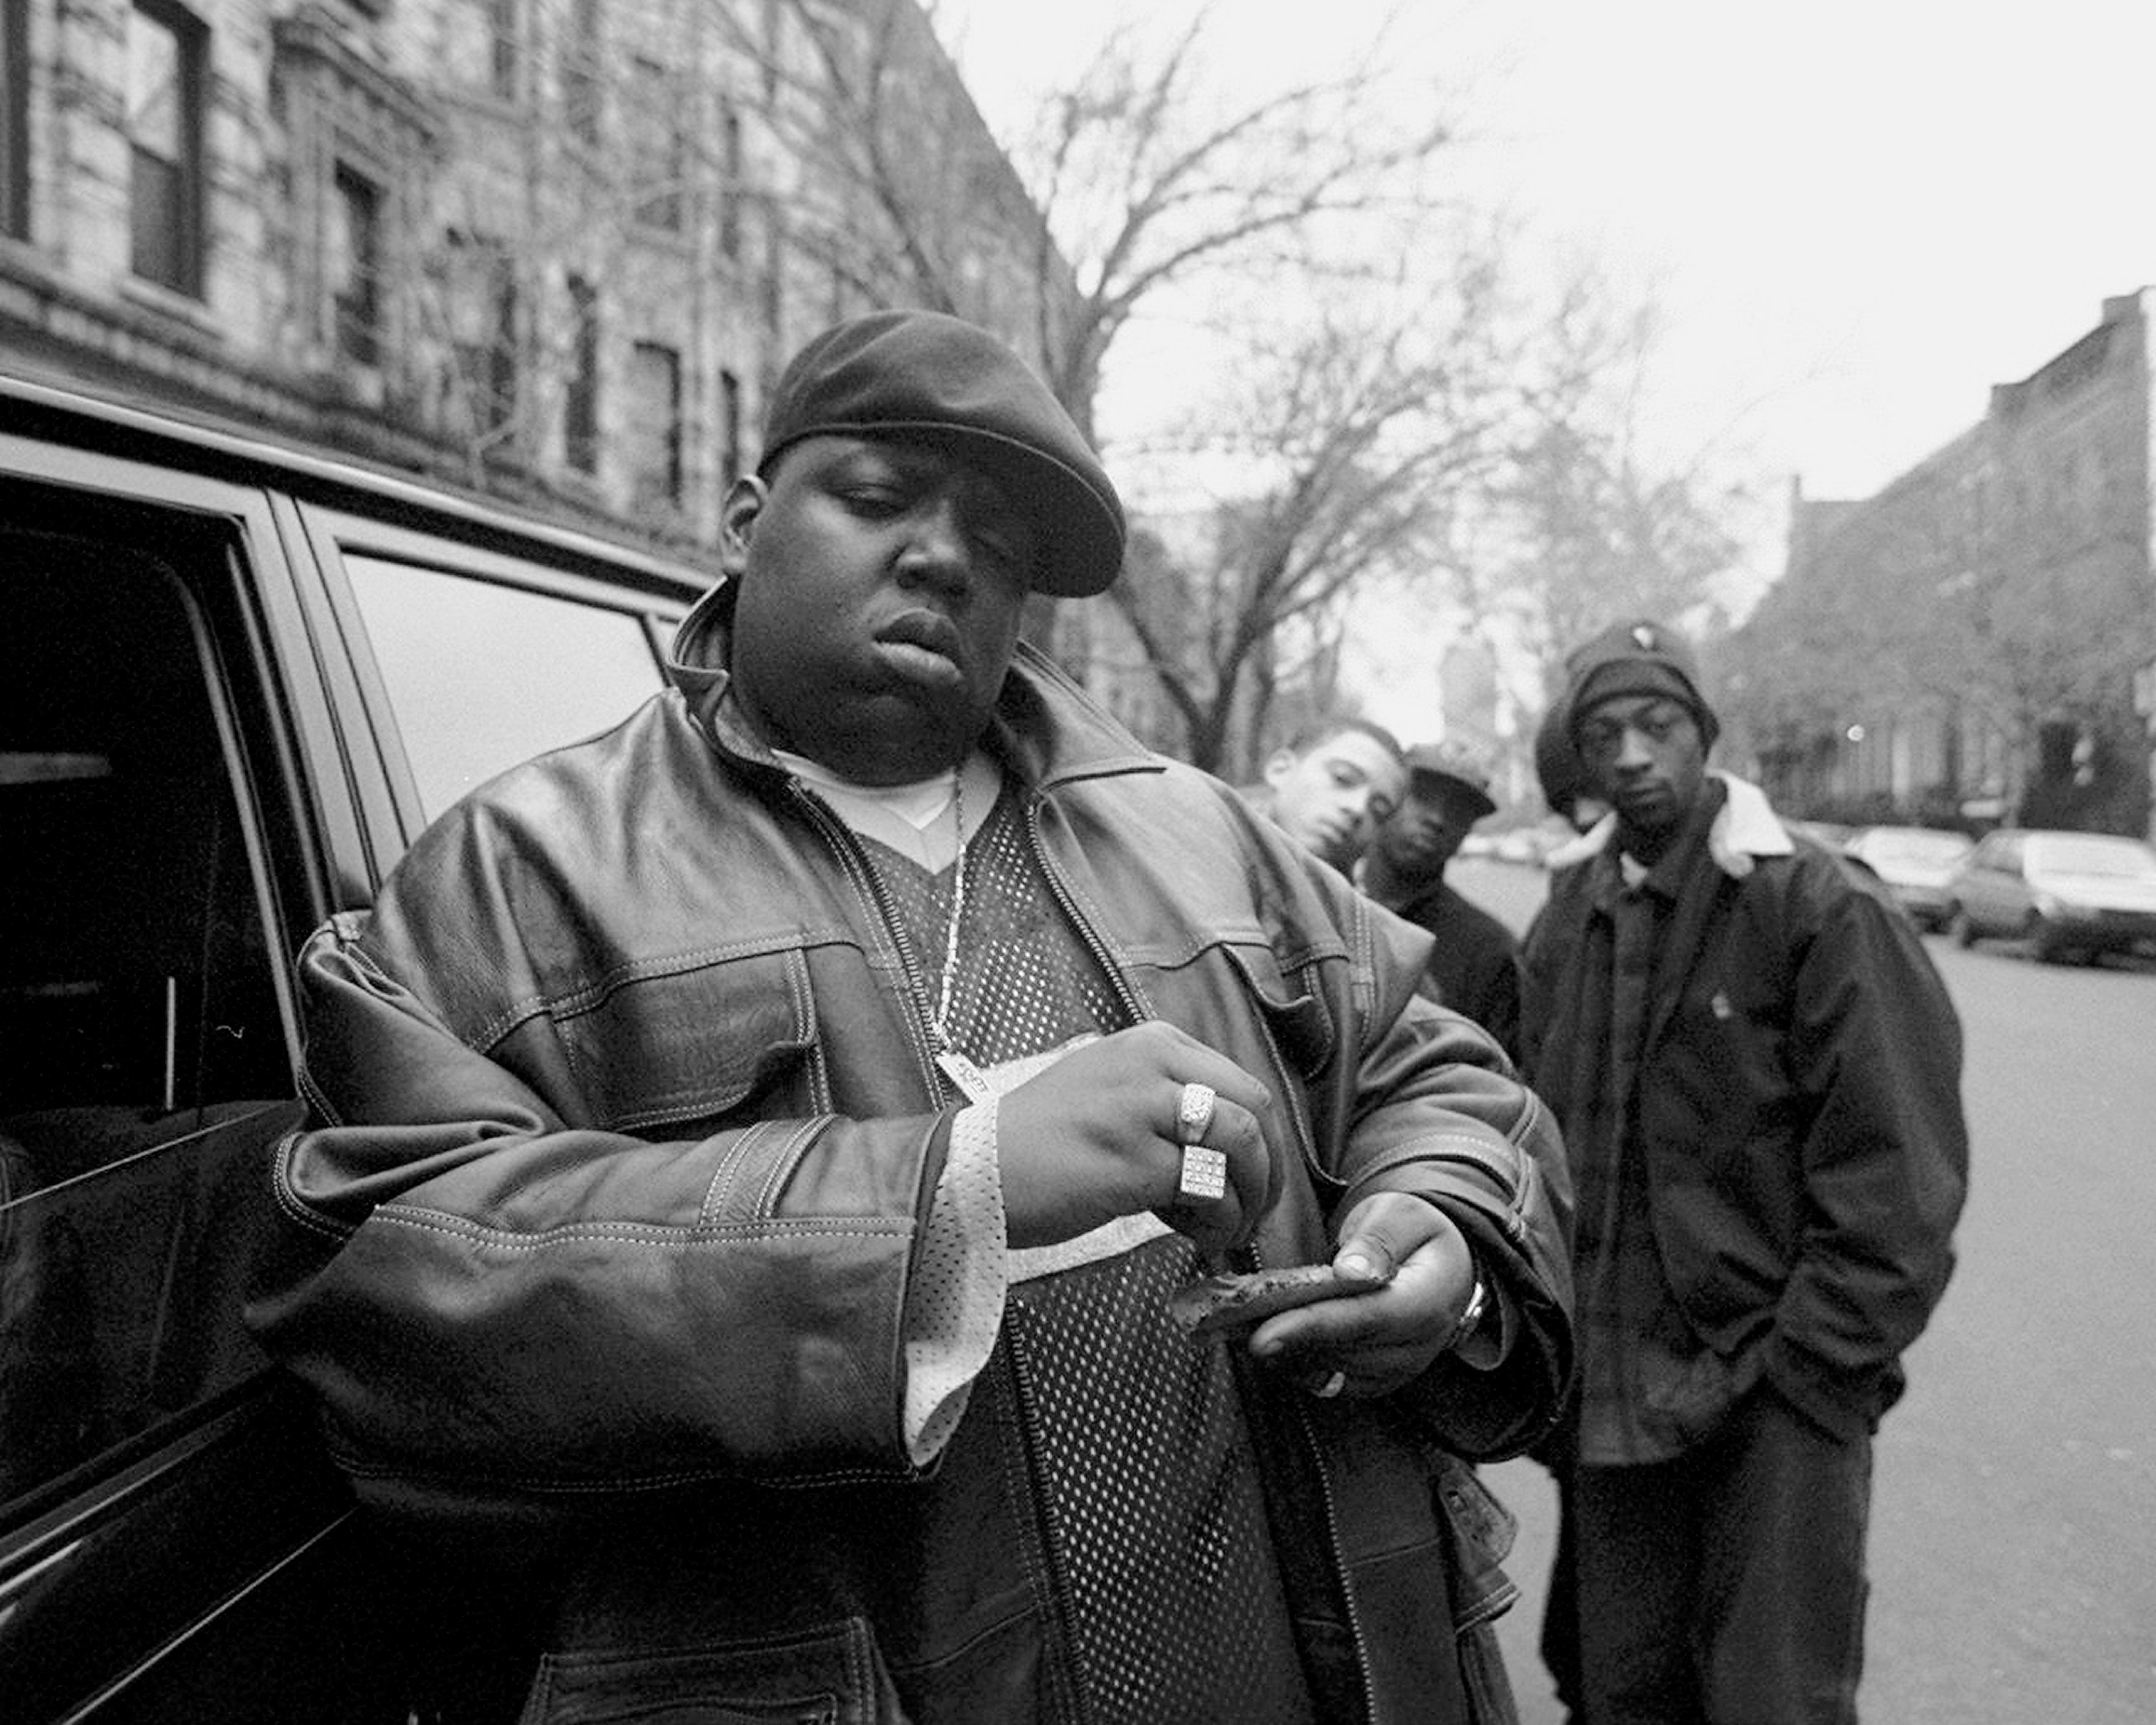 notorious b.i.g. (feat. puff daddy & mase) – “mo money mo problems”